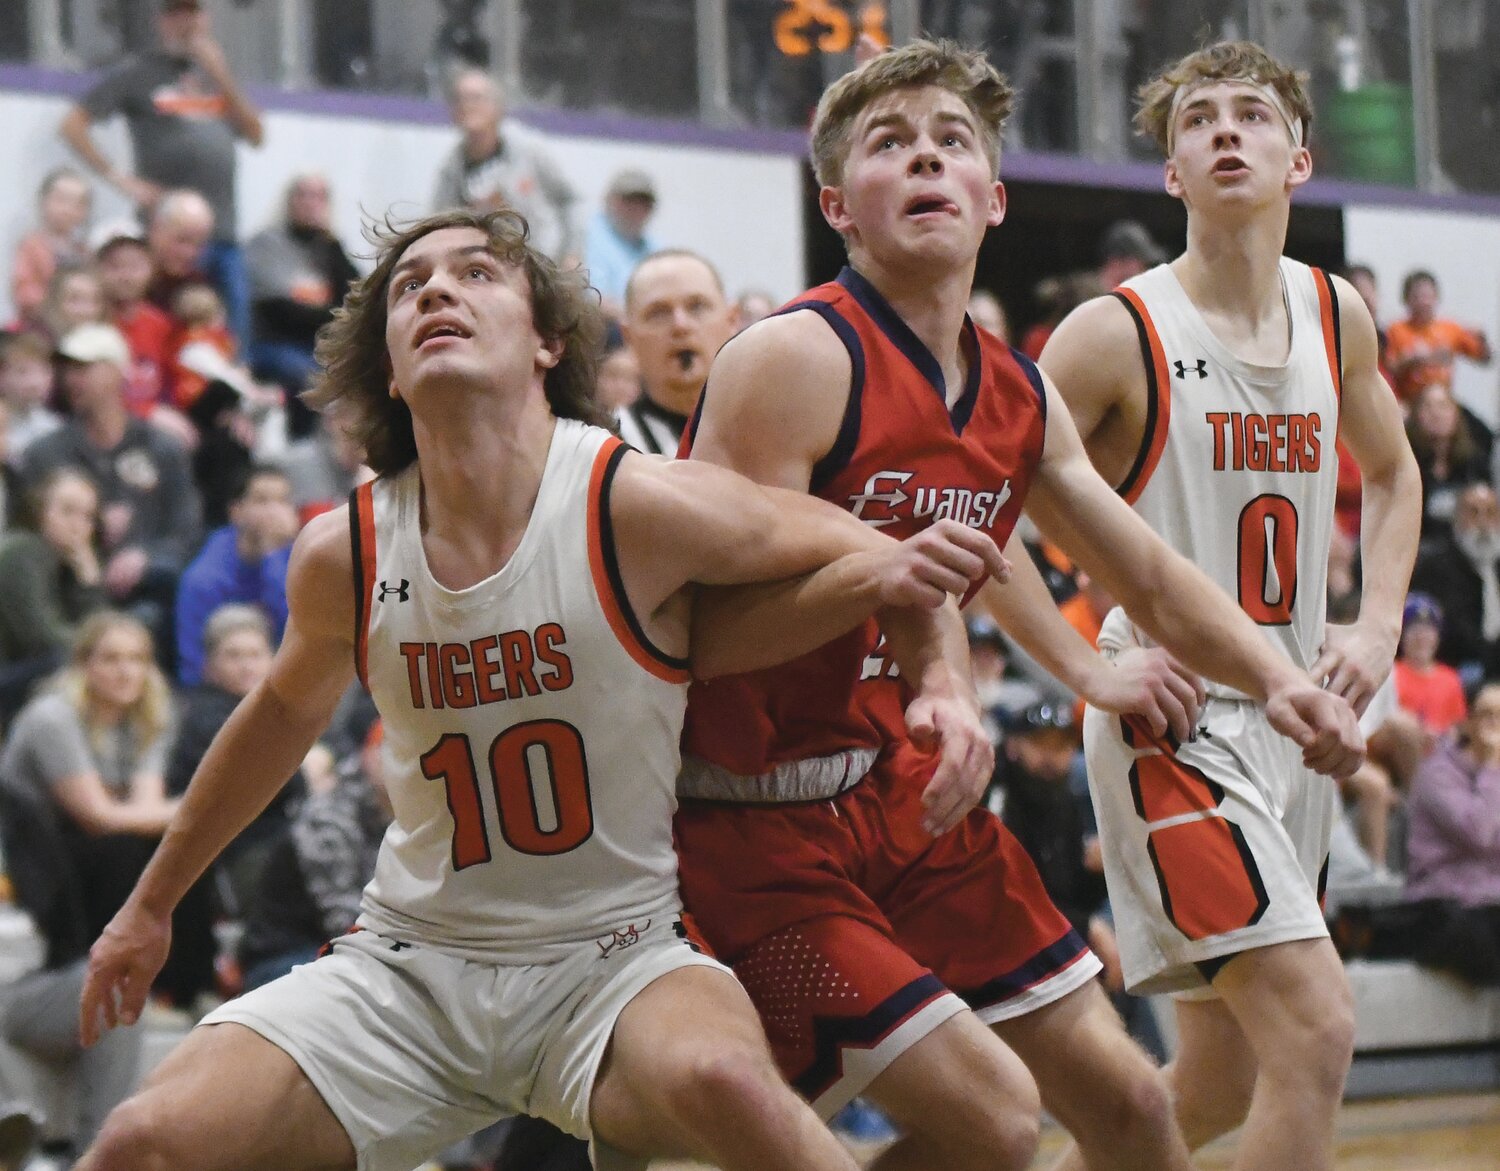 Red Devils senior Luke Robinette boxes out for a rebound during Evanston’s 49-41 win Saturday over Rock Springs at the 4A West Regional Tournament in Green River. The Red Devils qualified for the State Tournament on the strength of that win.